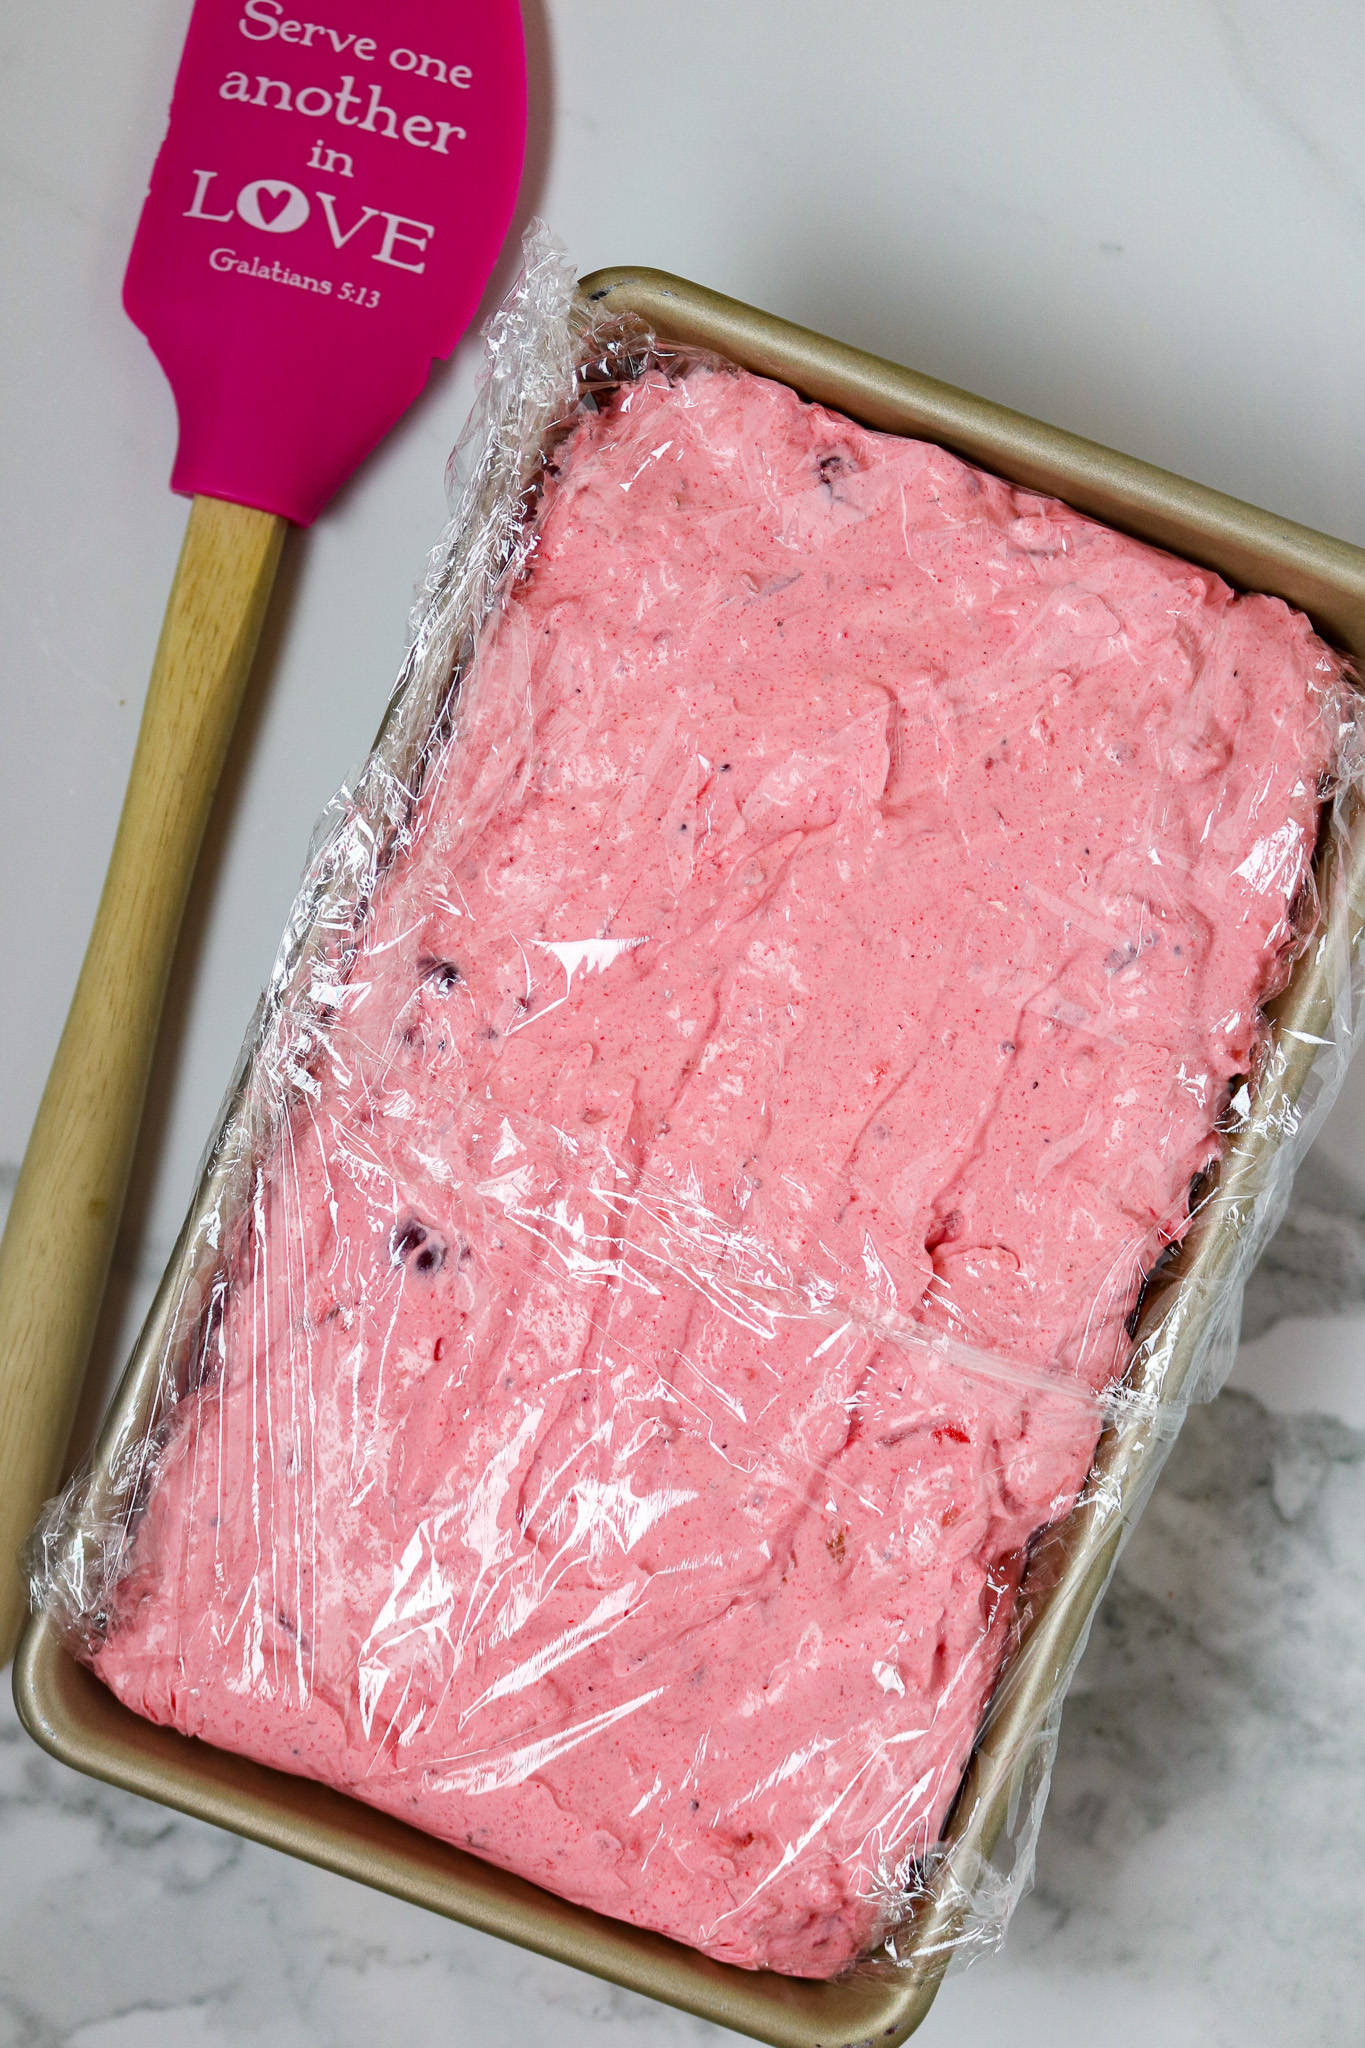 A bread loaf pan filled with pink whipped topping dessert,